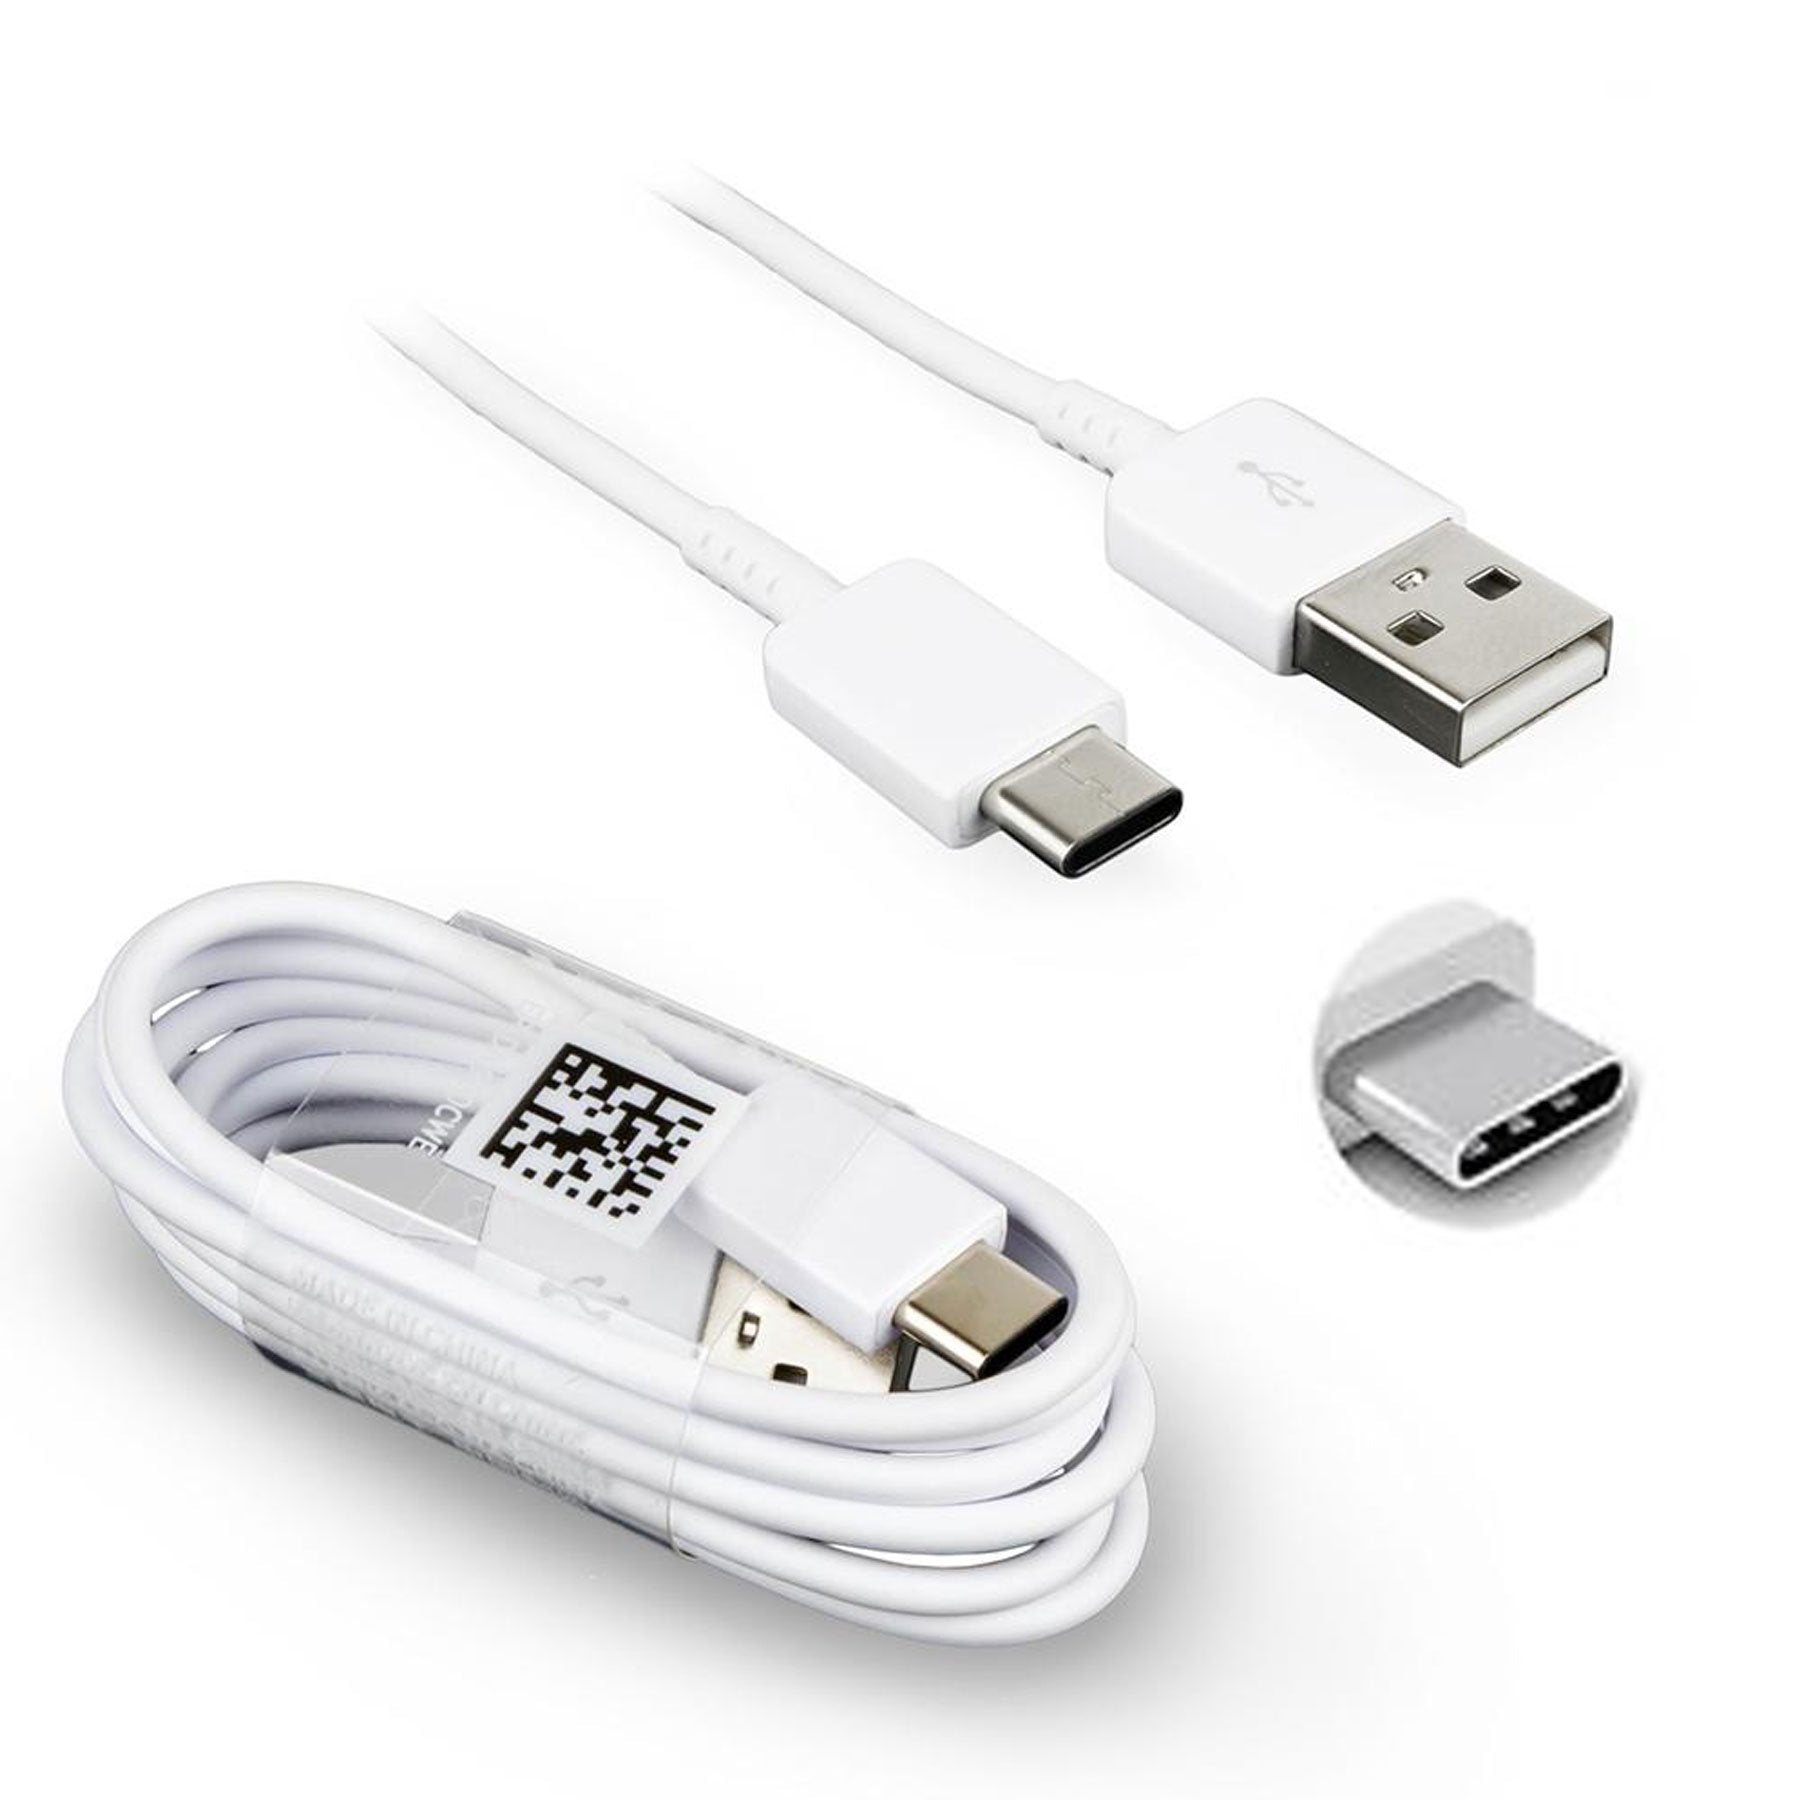 Samsung USB Type C Charge & Sync Data Cable For Galaxy S8, S8+, A3(2017), A5(2017), A7(2017) A8 (2018) Galaxy C7 Pro, White Lead (ONLY) Type C USB - EP-DN930CWE)